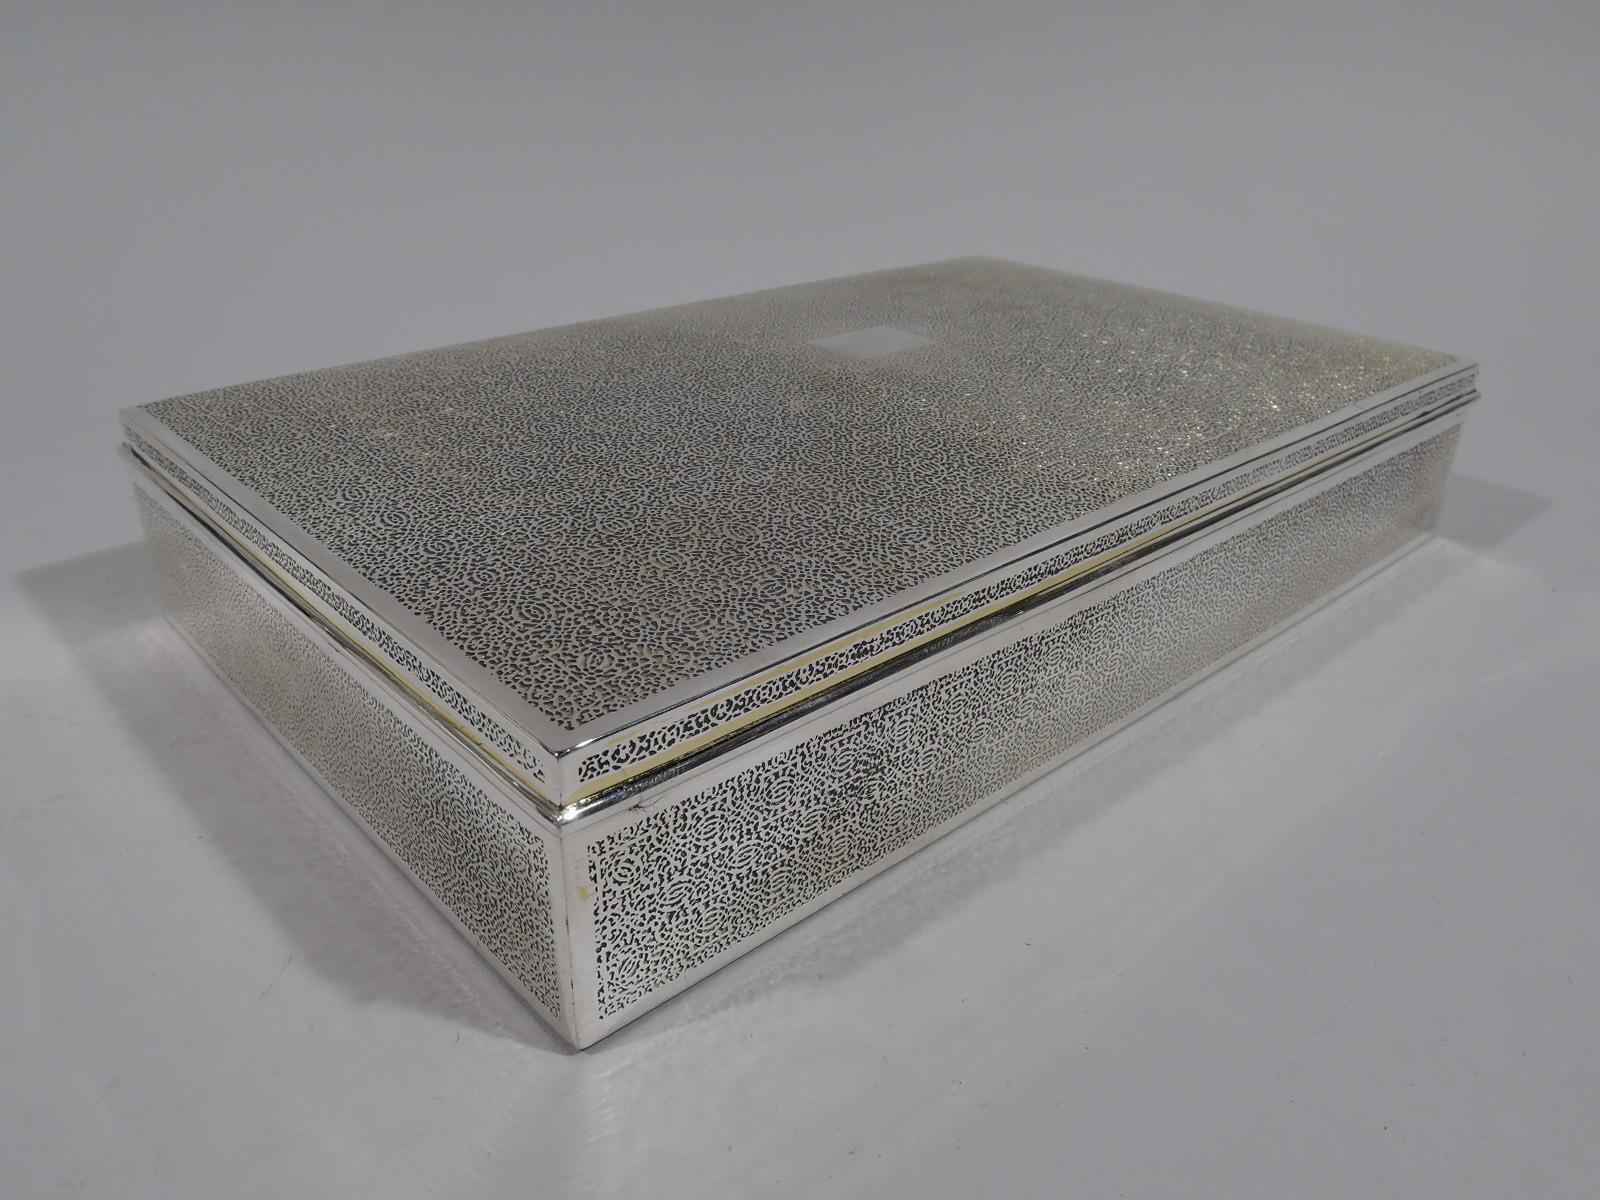 Large sterling silver box. Made by Tiffany & Co. in New York, circa 1920. Rectangular with straight sides. Cover gently curved and hinged with wraparound molded rim. Fine interlocking Moresque ornament acid-etched all-over sides and cover between